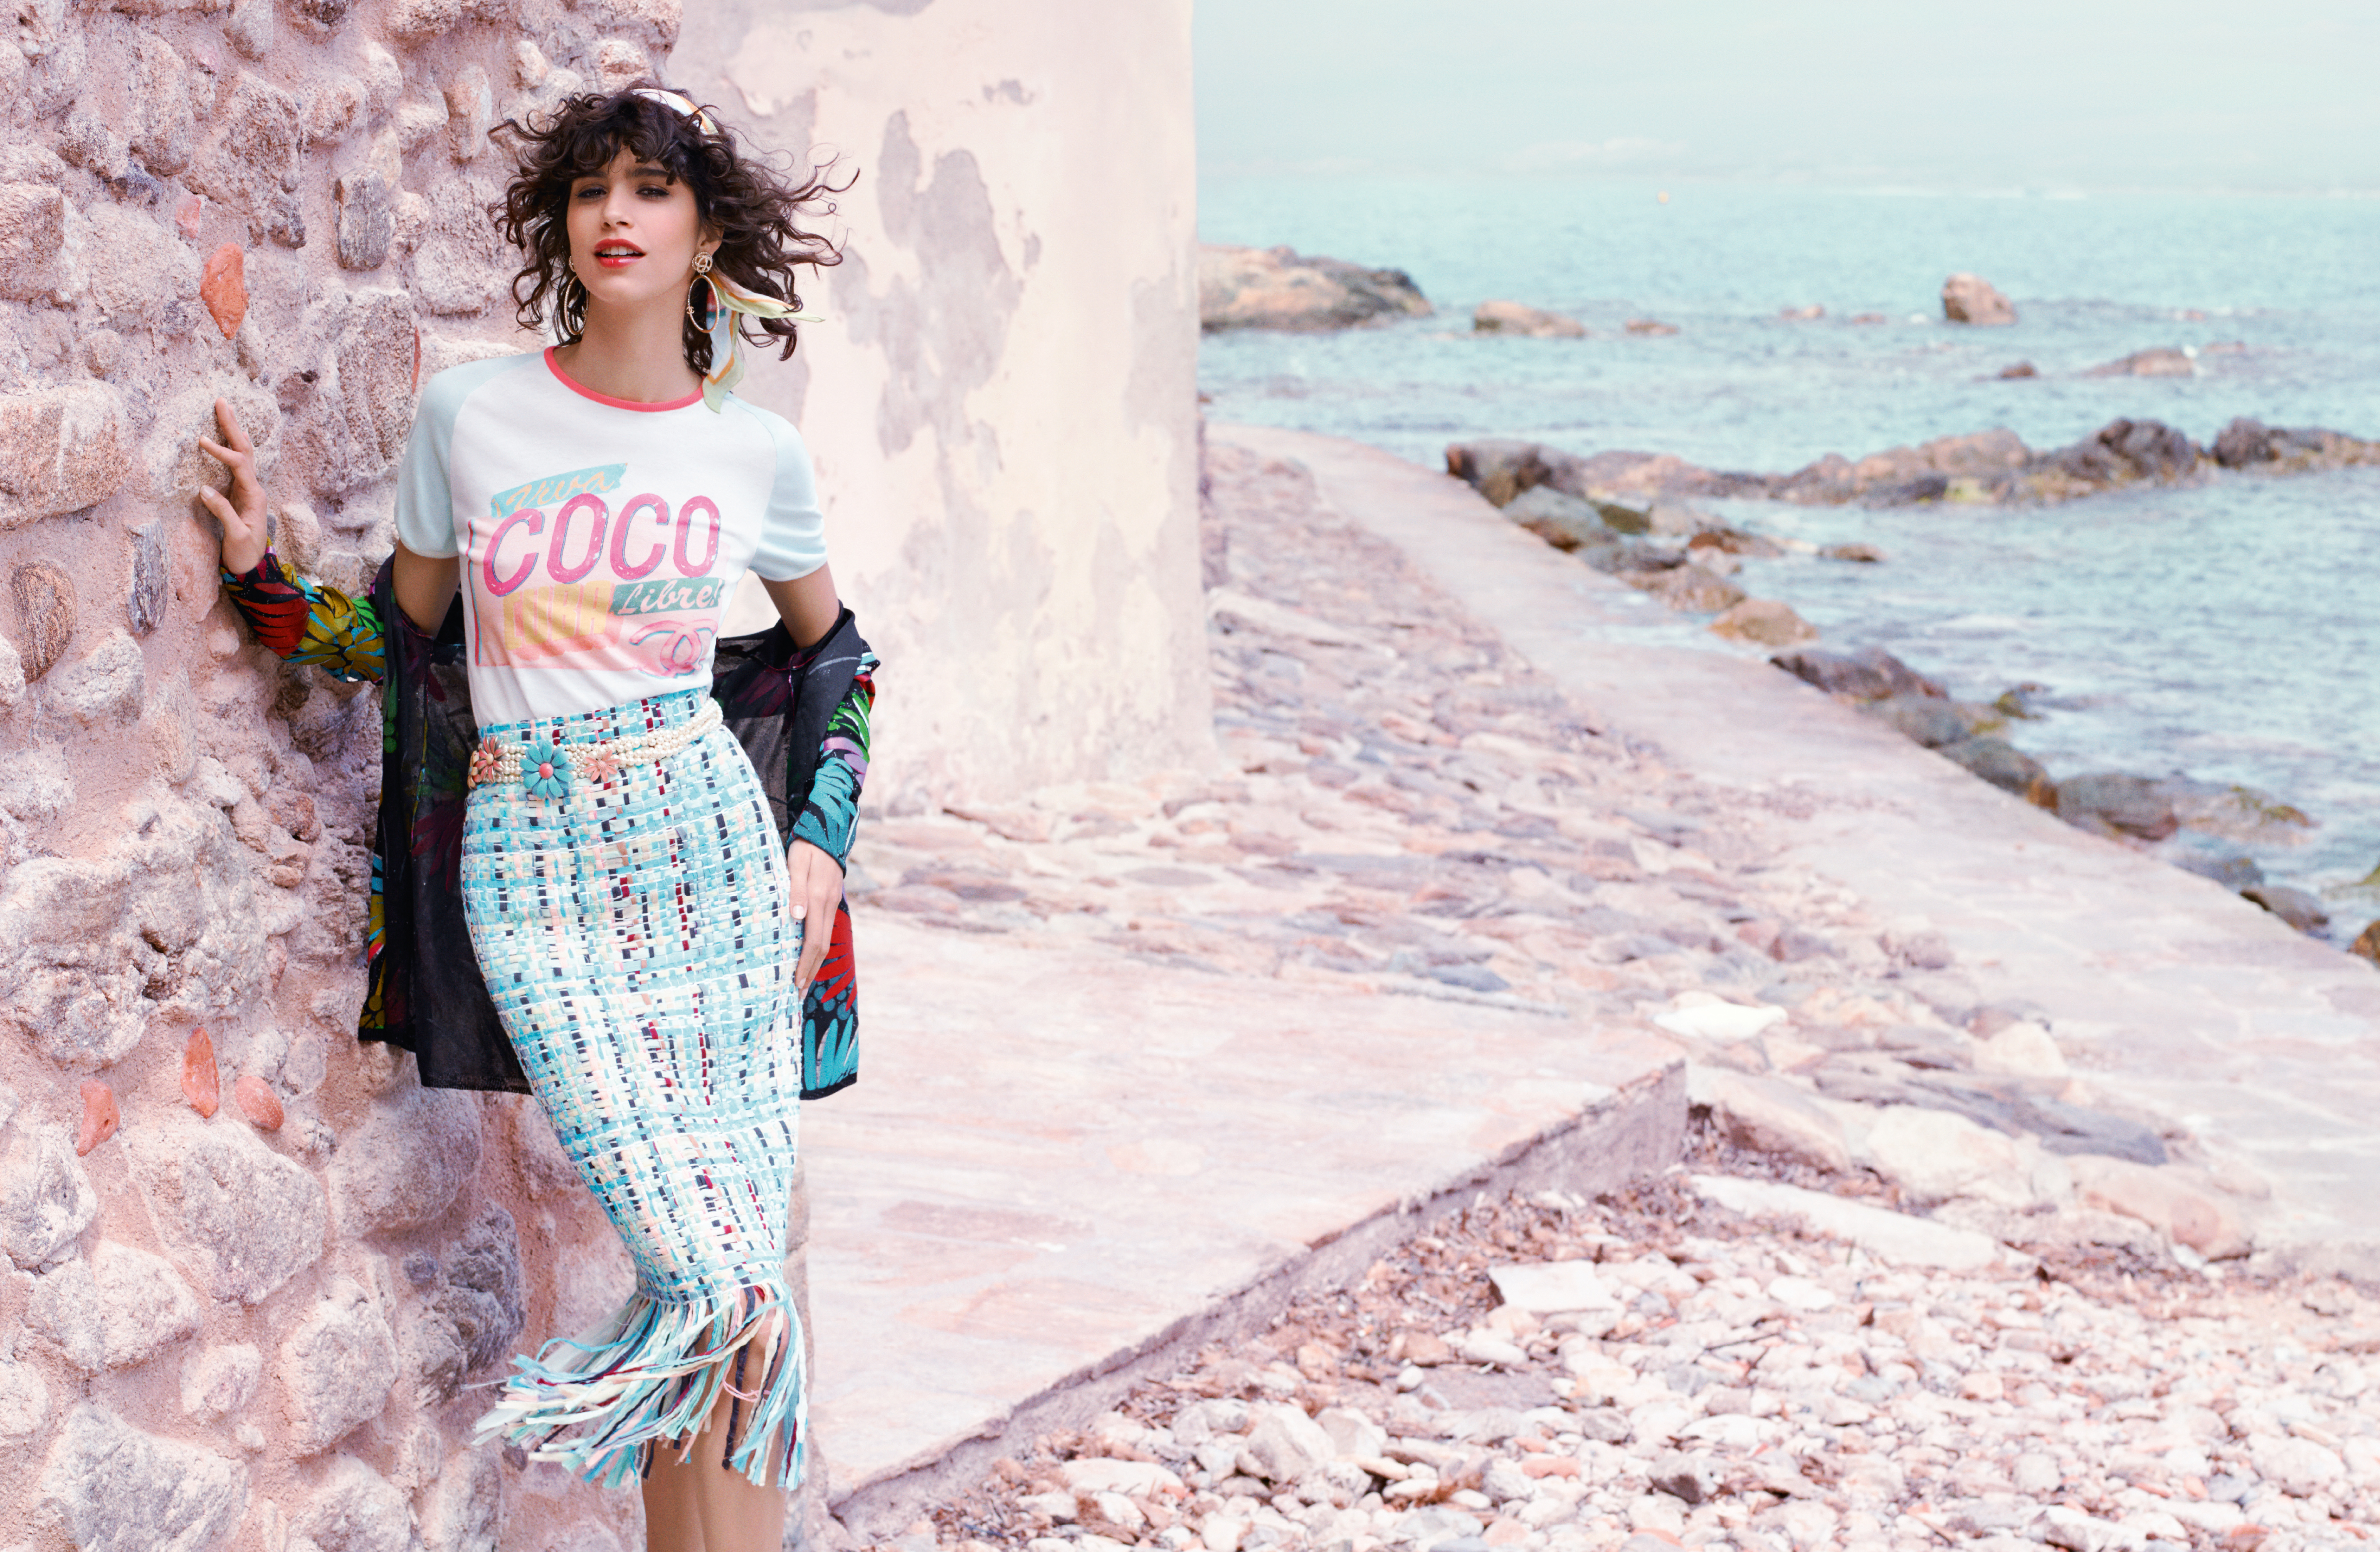 Chanel Takes on Cuba (Again!) for New Resort Campaign